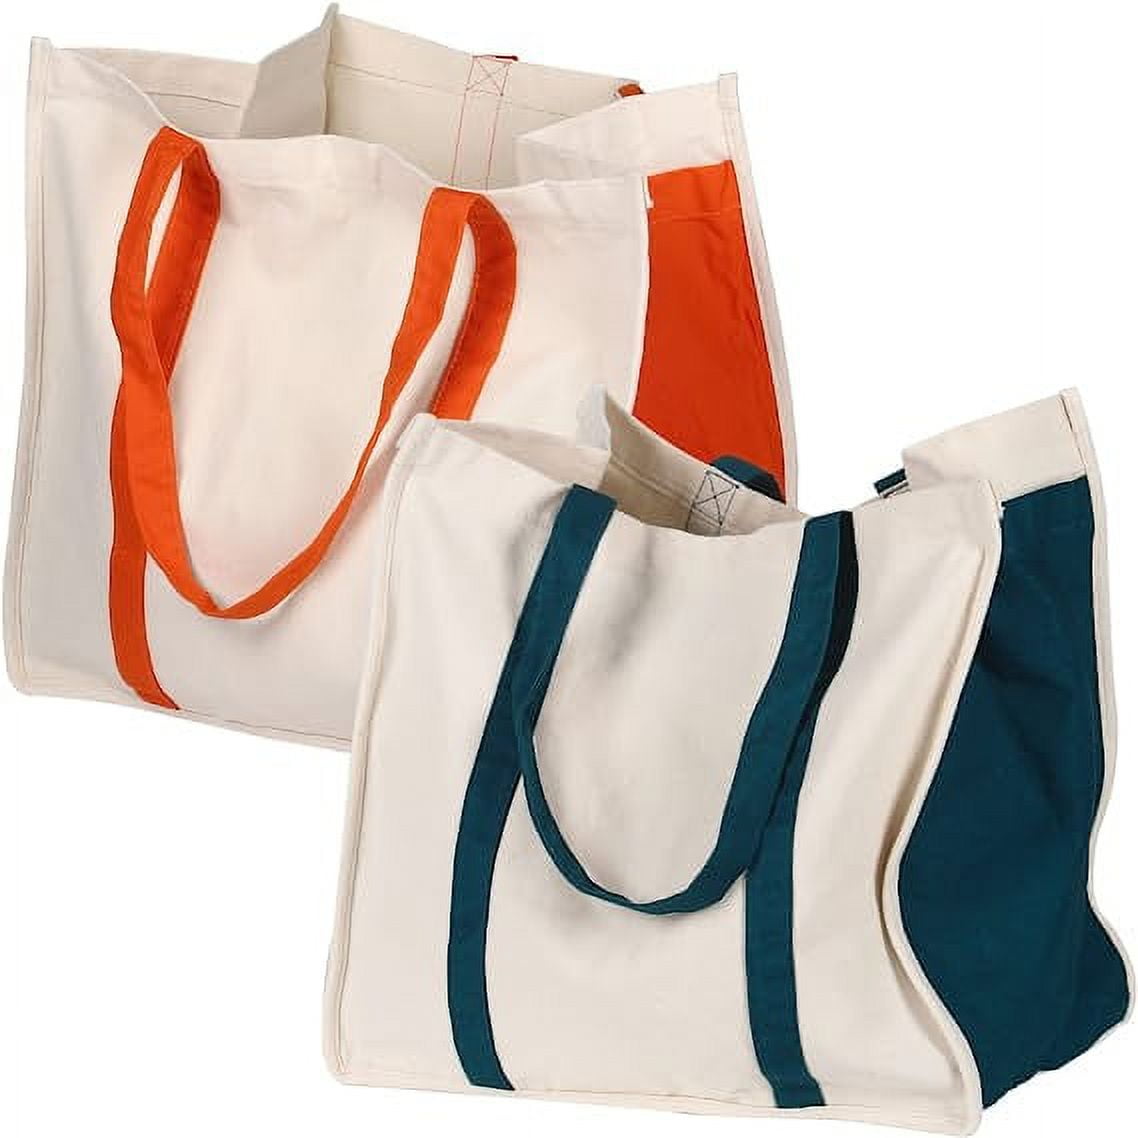 Generic 2 Pcs Reusable Large Canvas Tote Bags with Separate